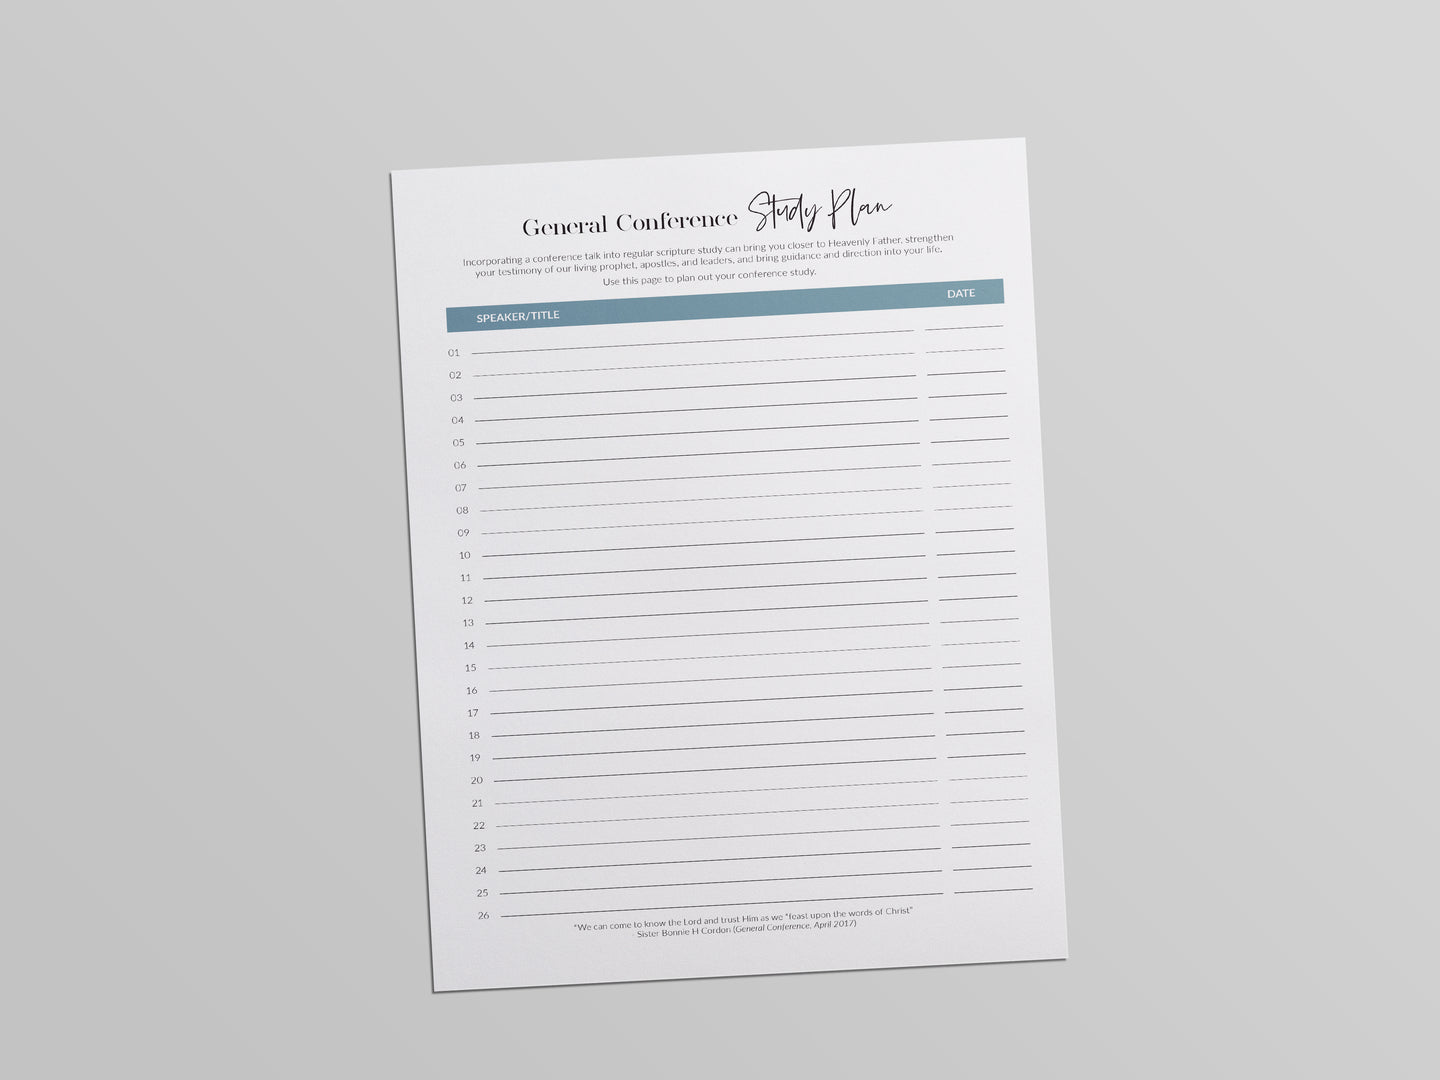 General Conference Study Plan Sheet